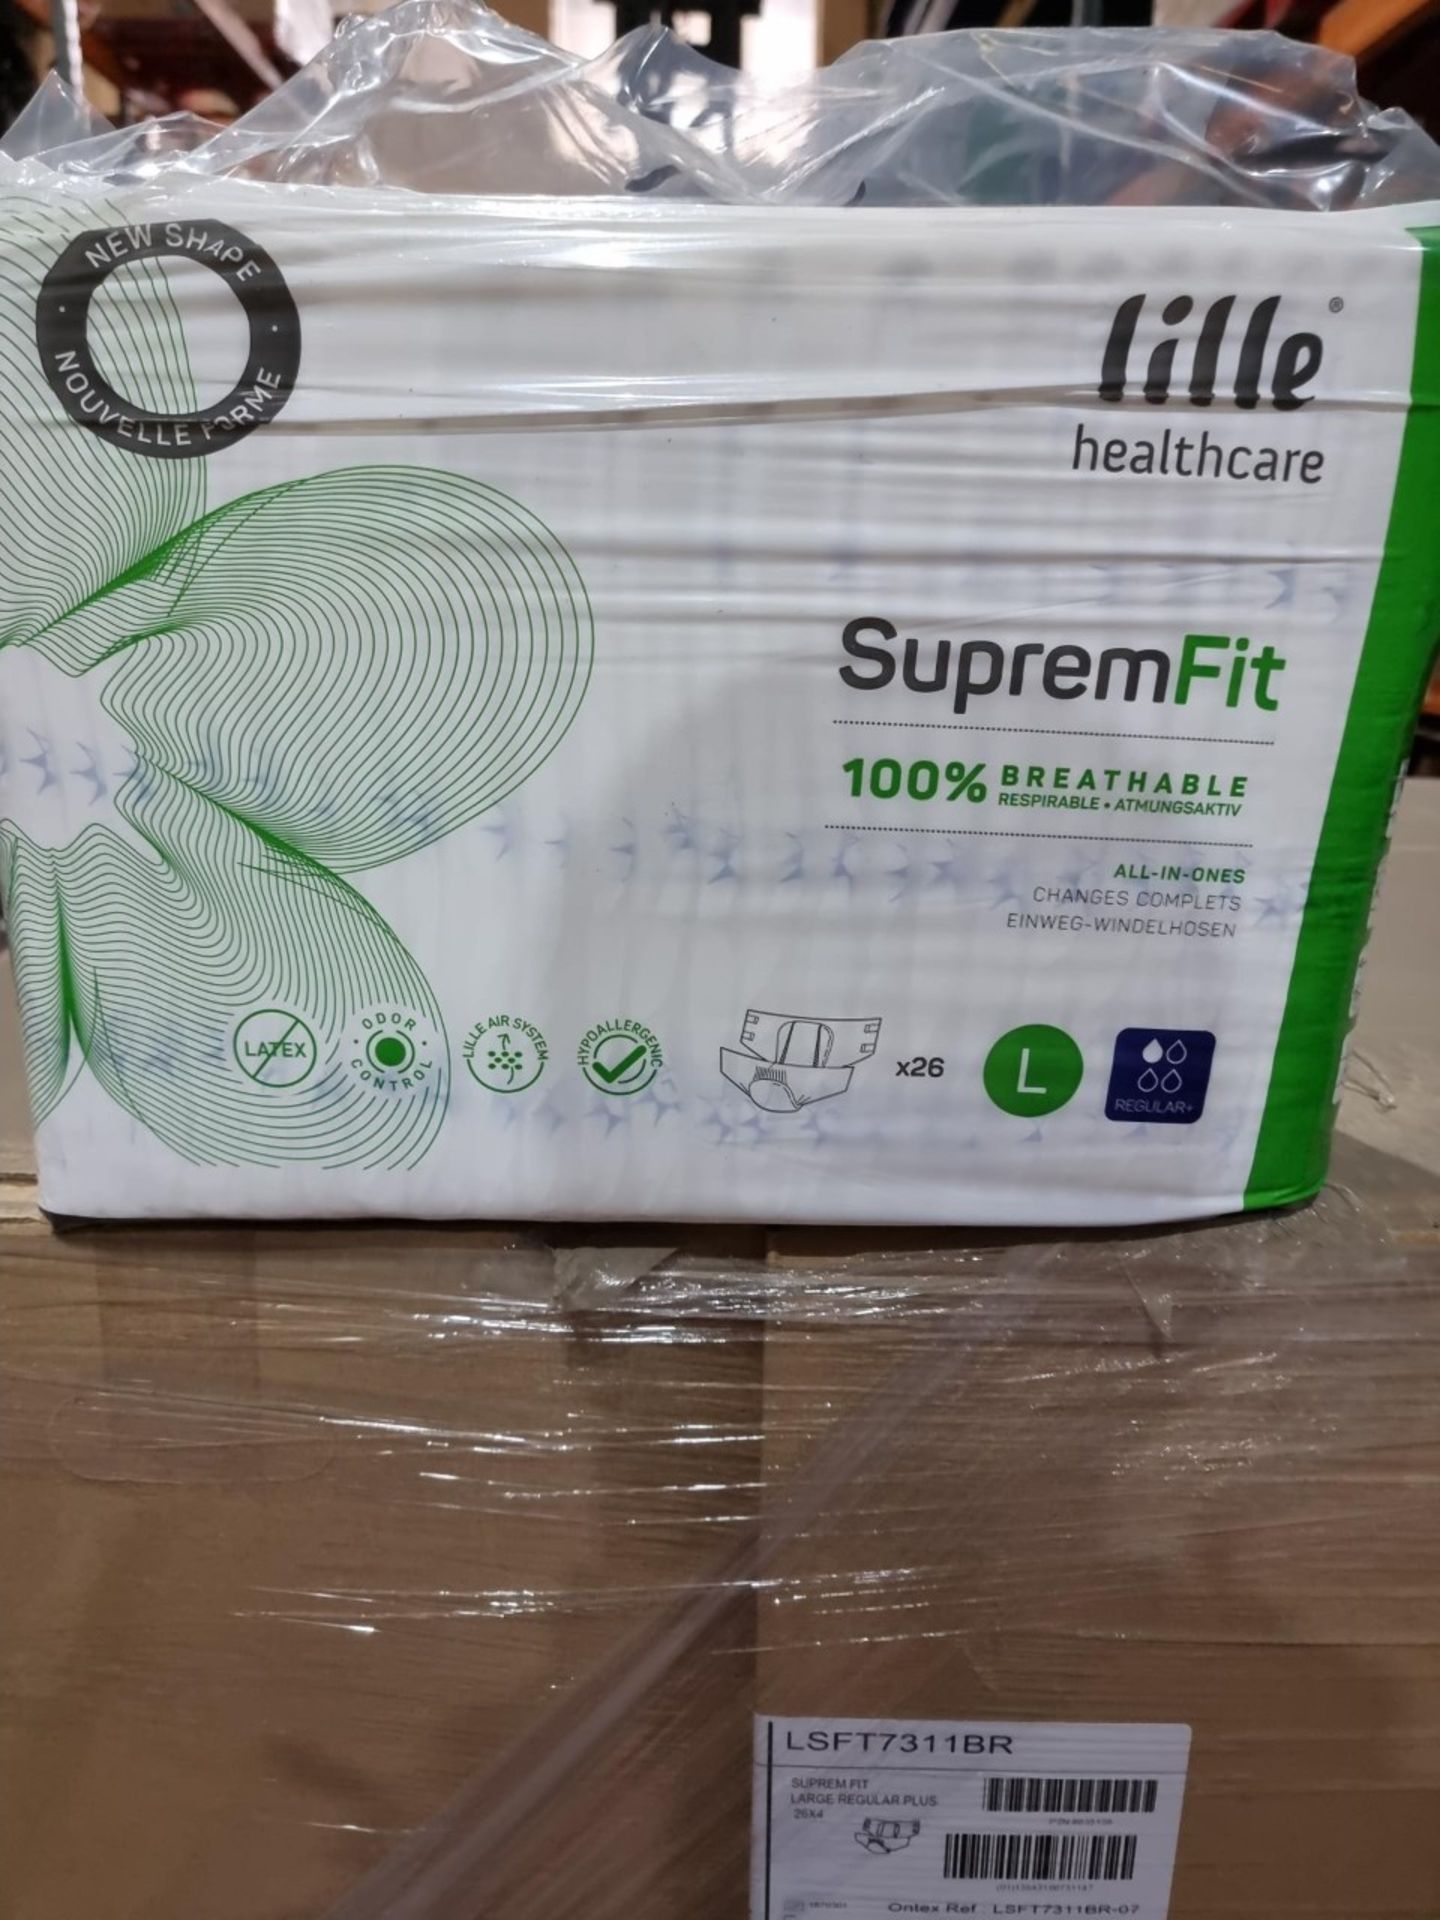 NO VAT (J101) PALLET TO CONTAIN 48 x NEW SEALED PACKS OF 26 LILLE HEALTHCARE SUPREMFIT ALL IN ONES